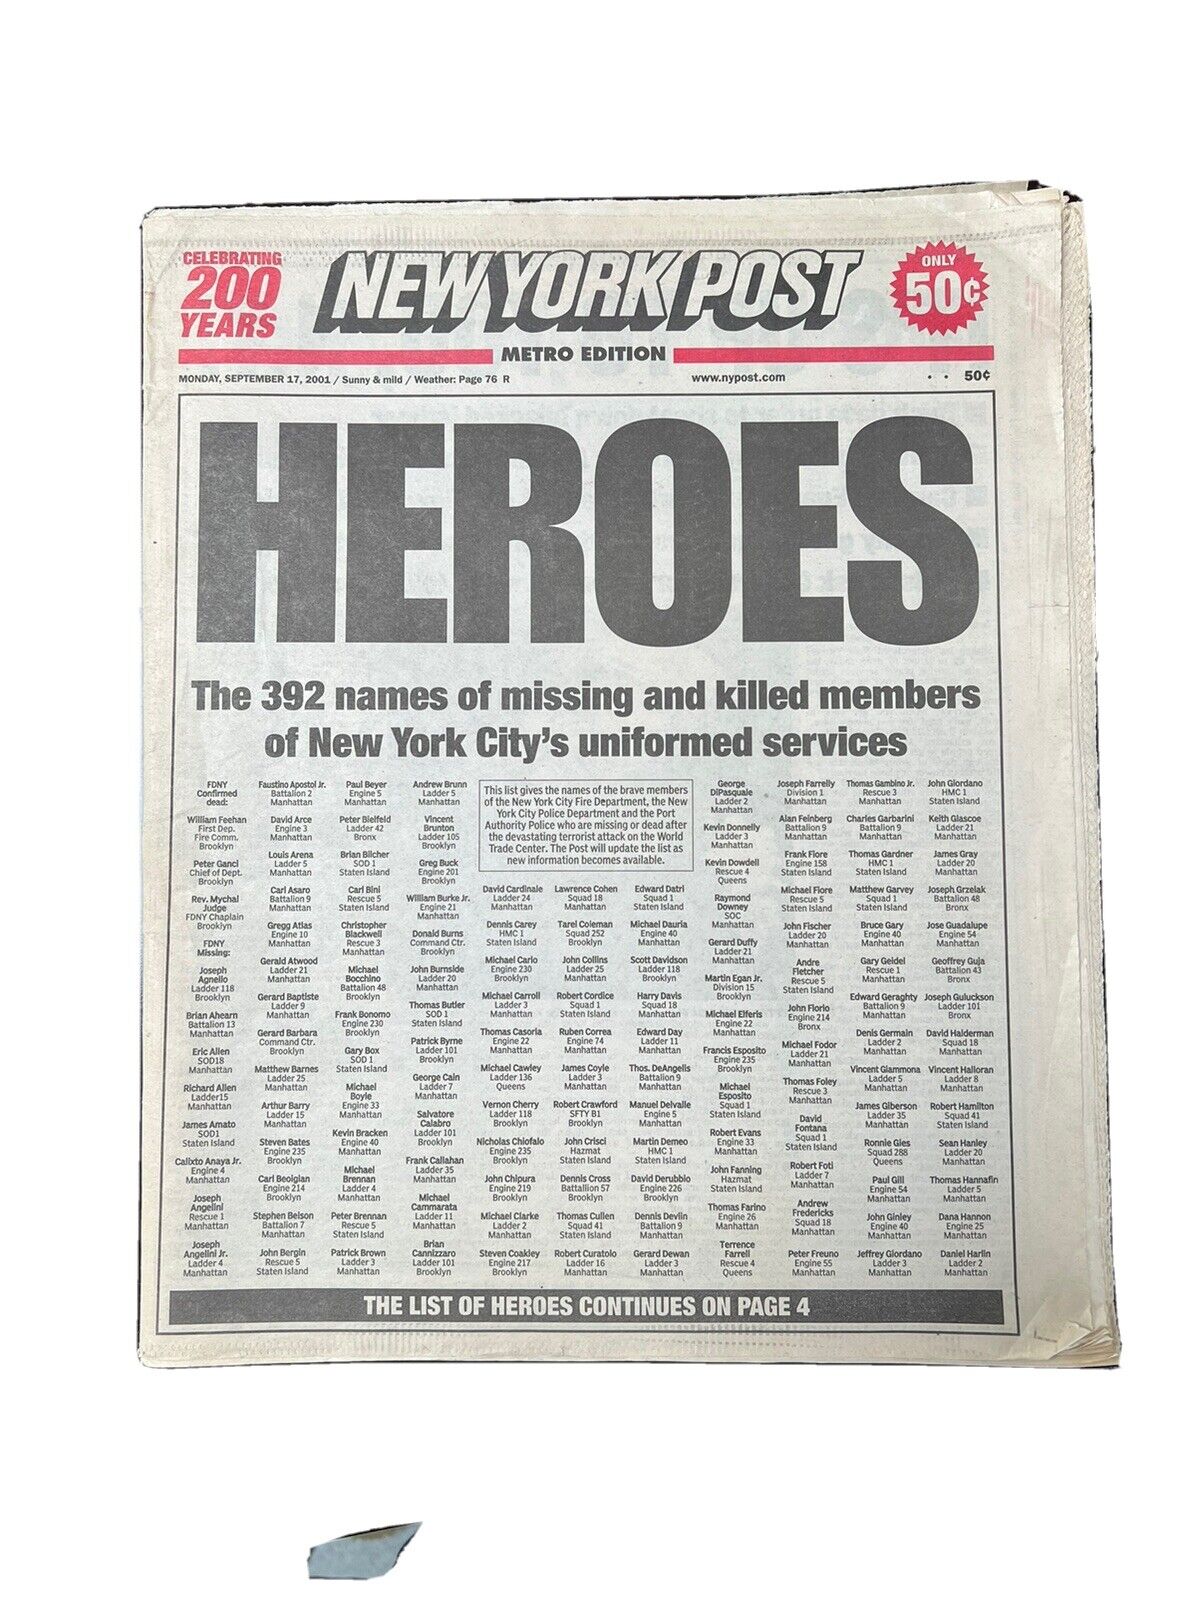 newspaper New York Post September 17 2001 92 page issue 'Heroes'